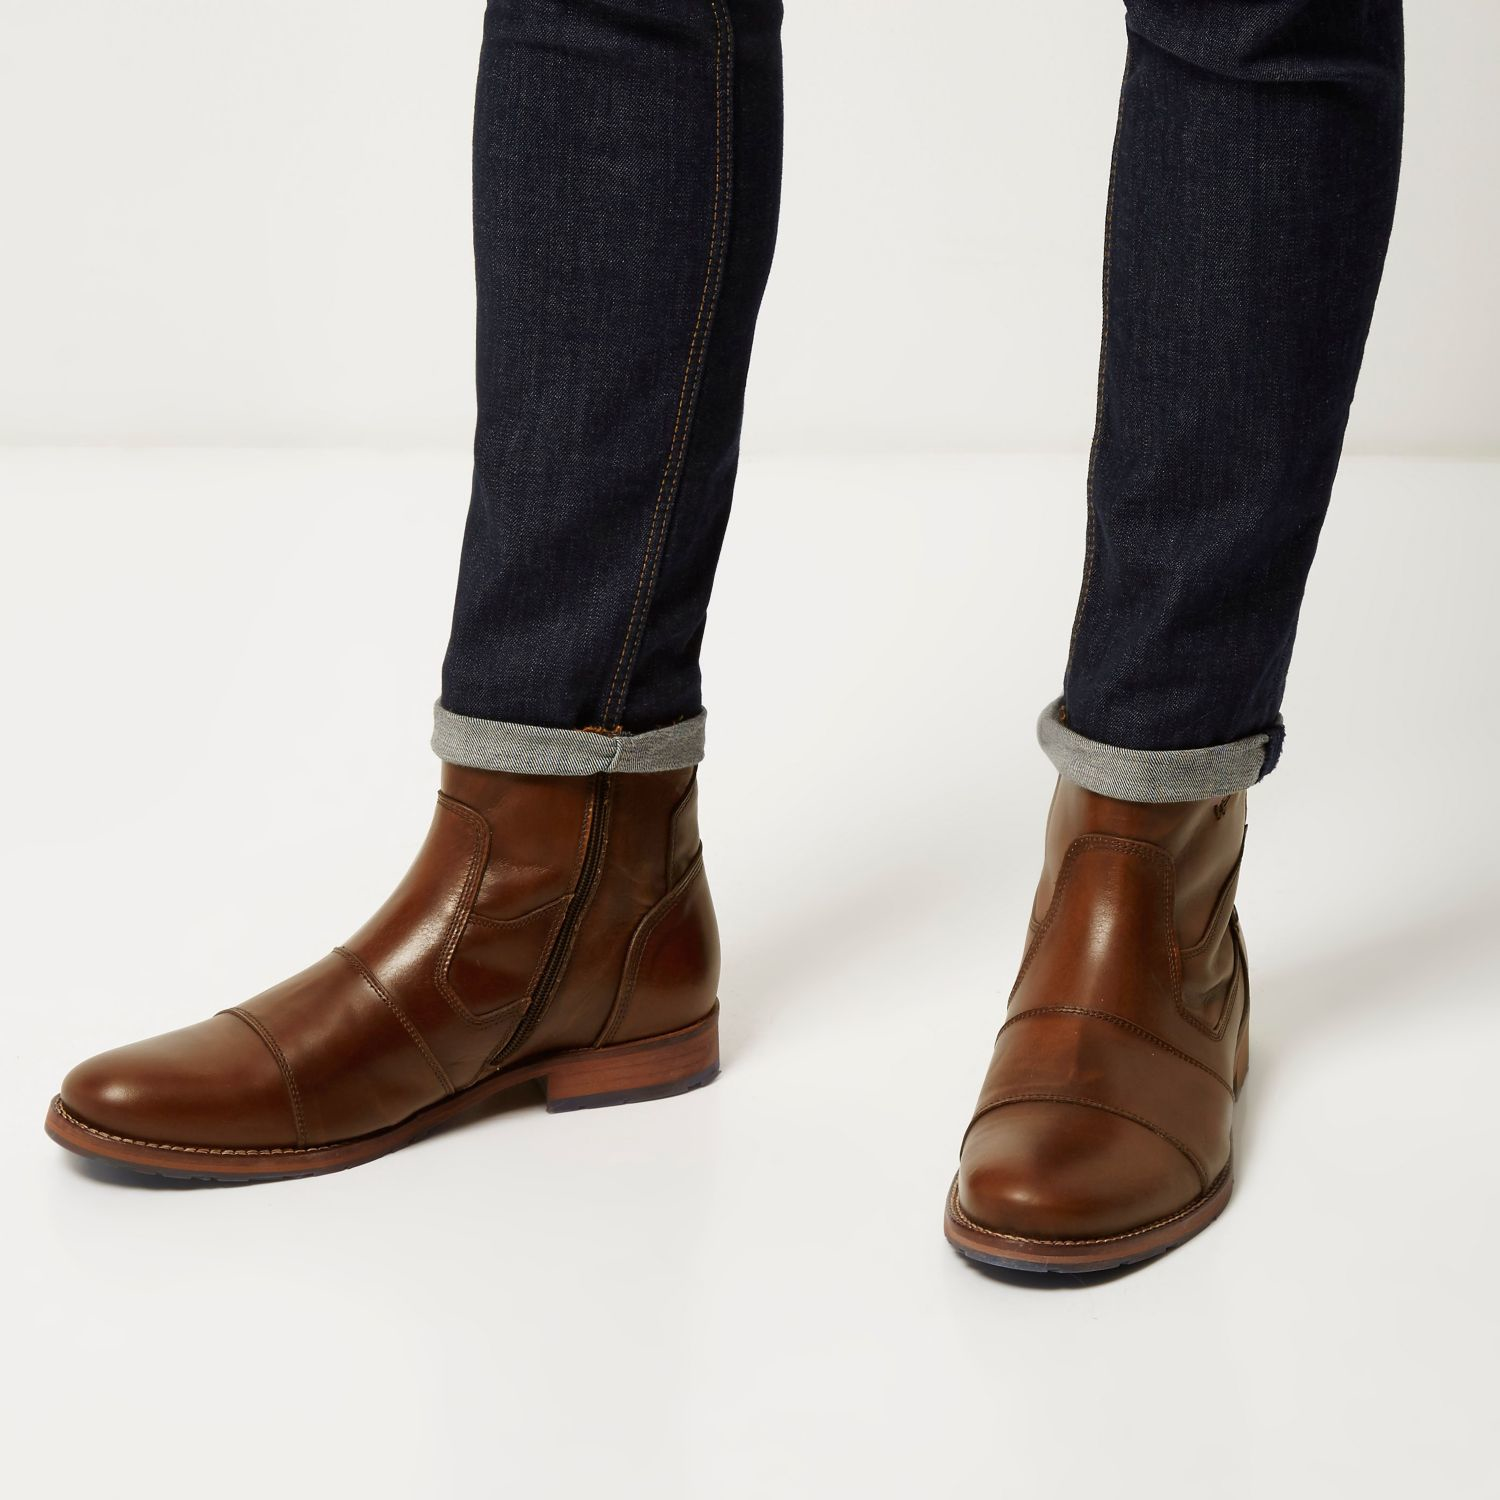 Lyst - River Island Brown Leather Zip Side Ankle Boots in Brown for Men